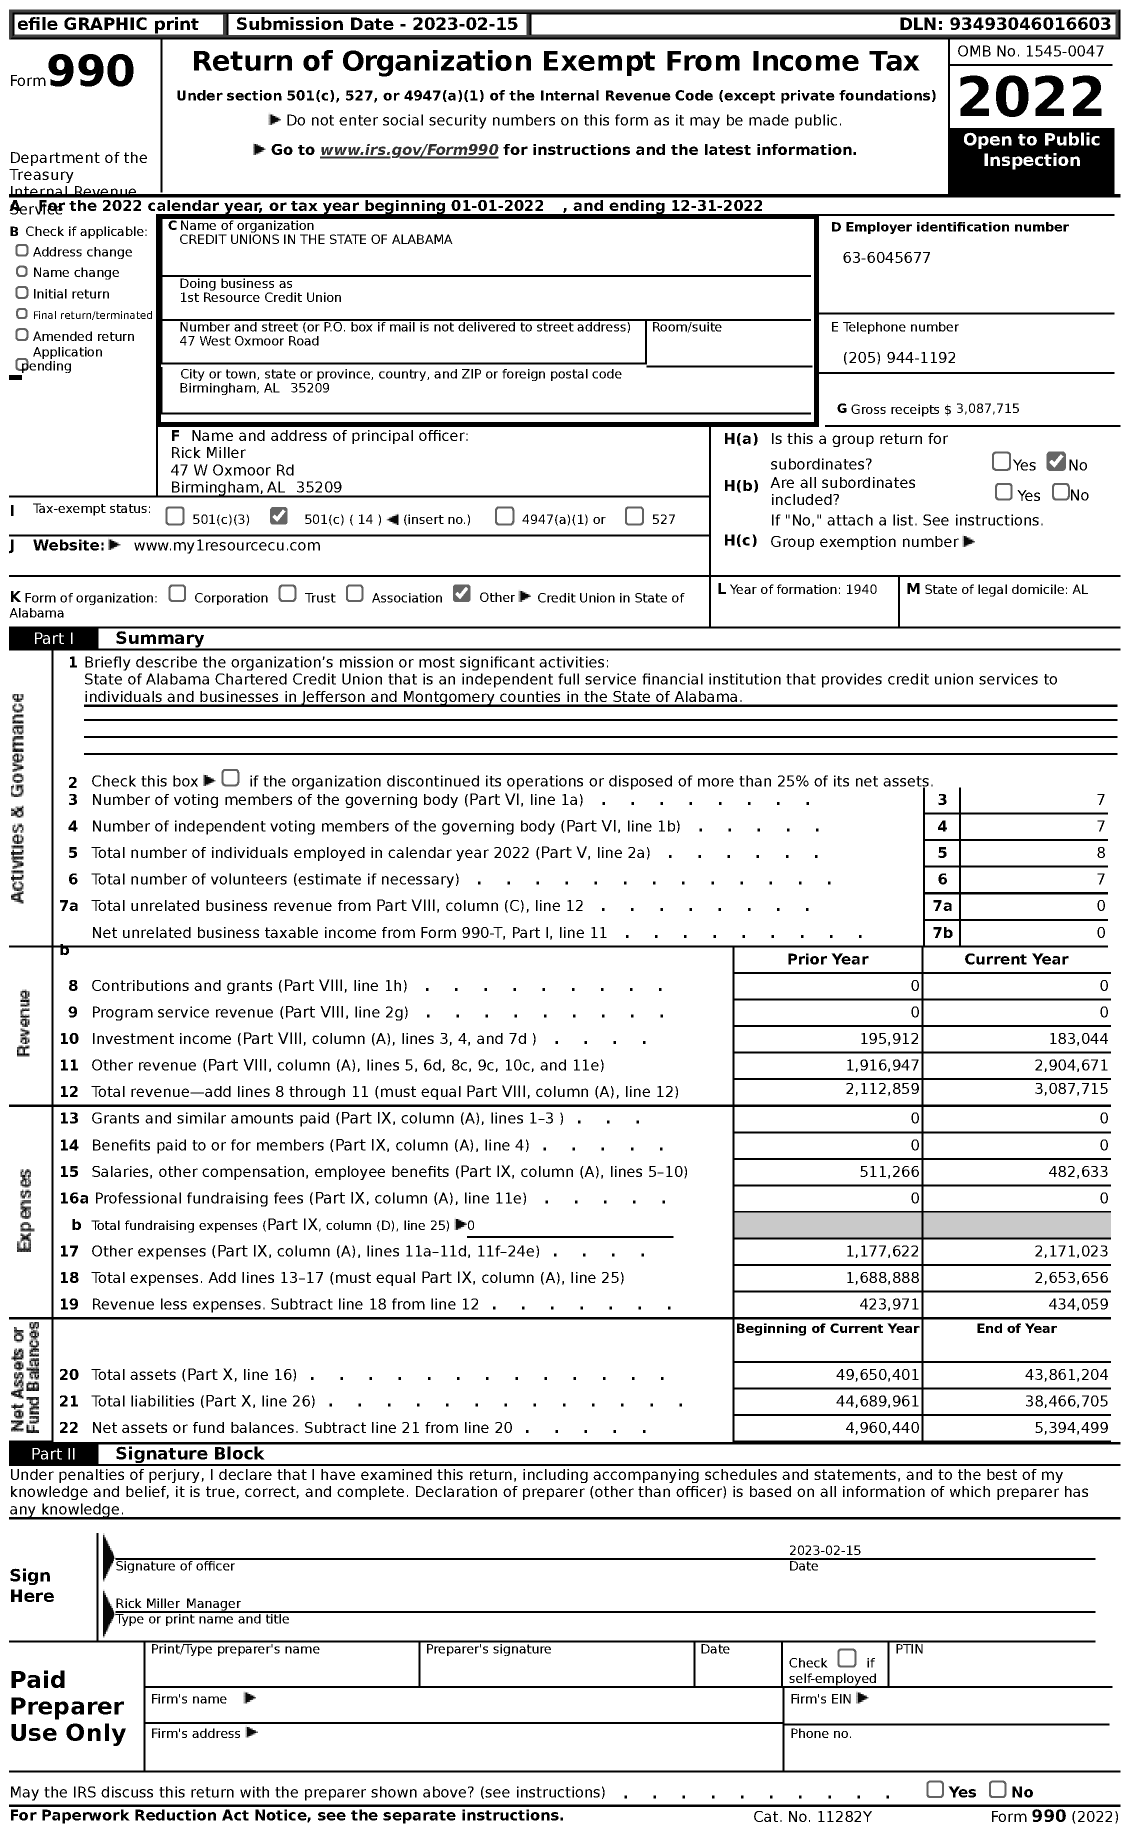 Image of first page of 2022 Form 990 for 1st Resource Credit Union